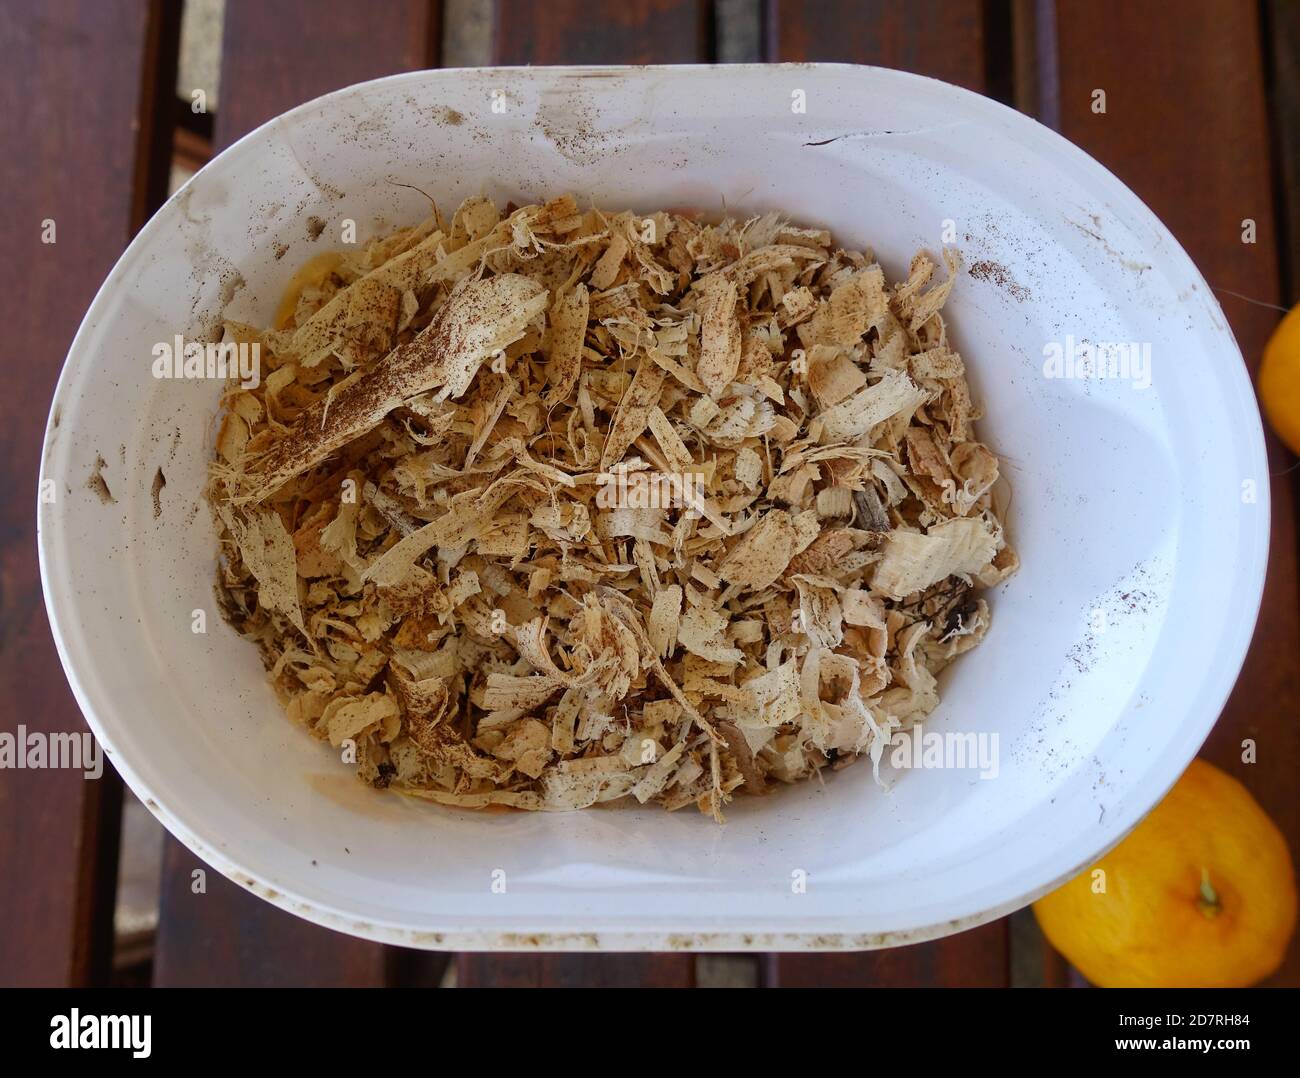 Container of wood shavings to be used for gardening. Stock Photo